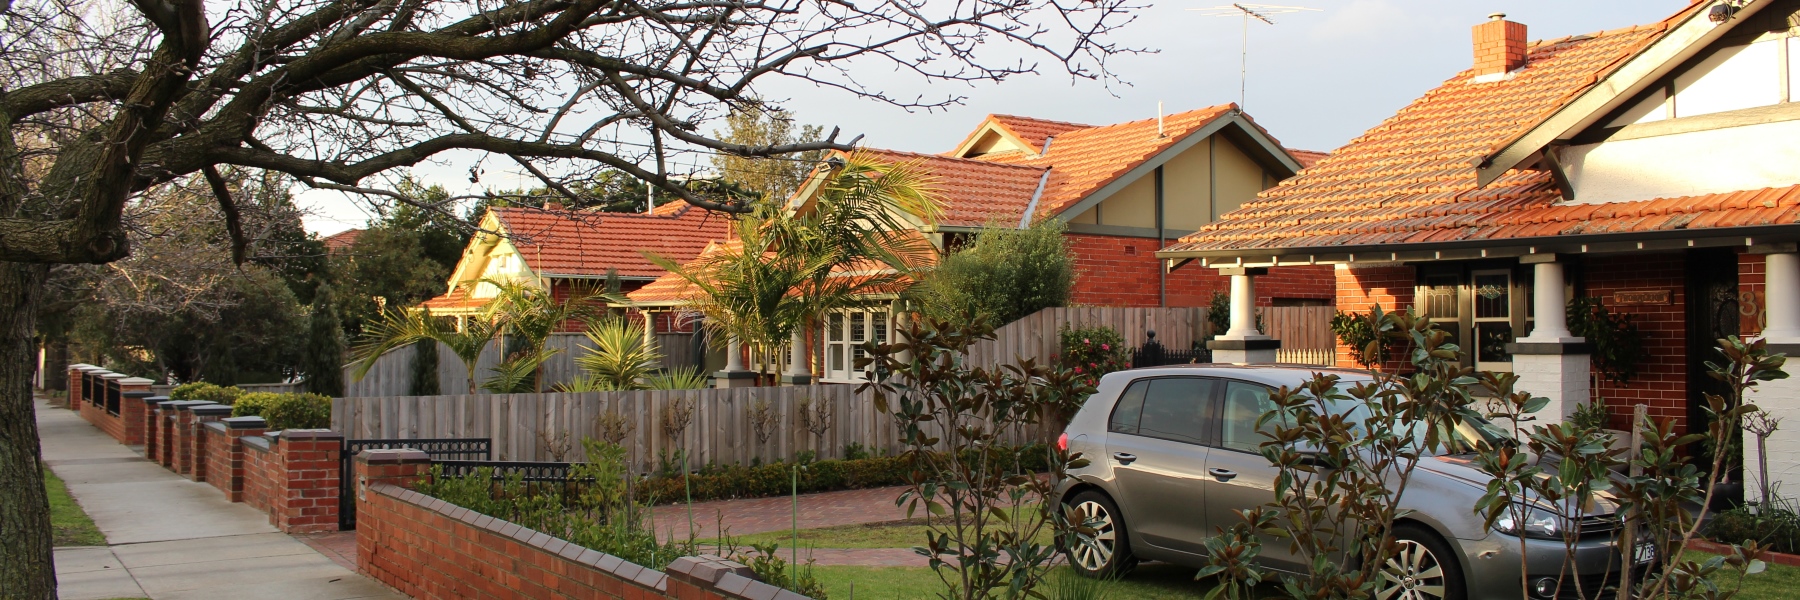 Houses in Campbell St, Bentleigh